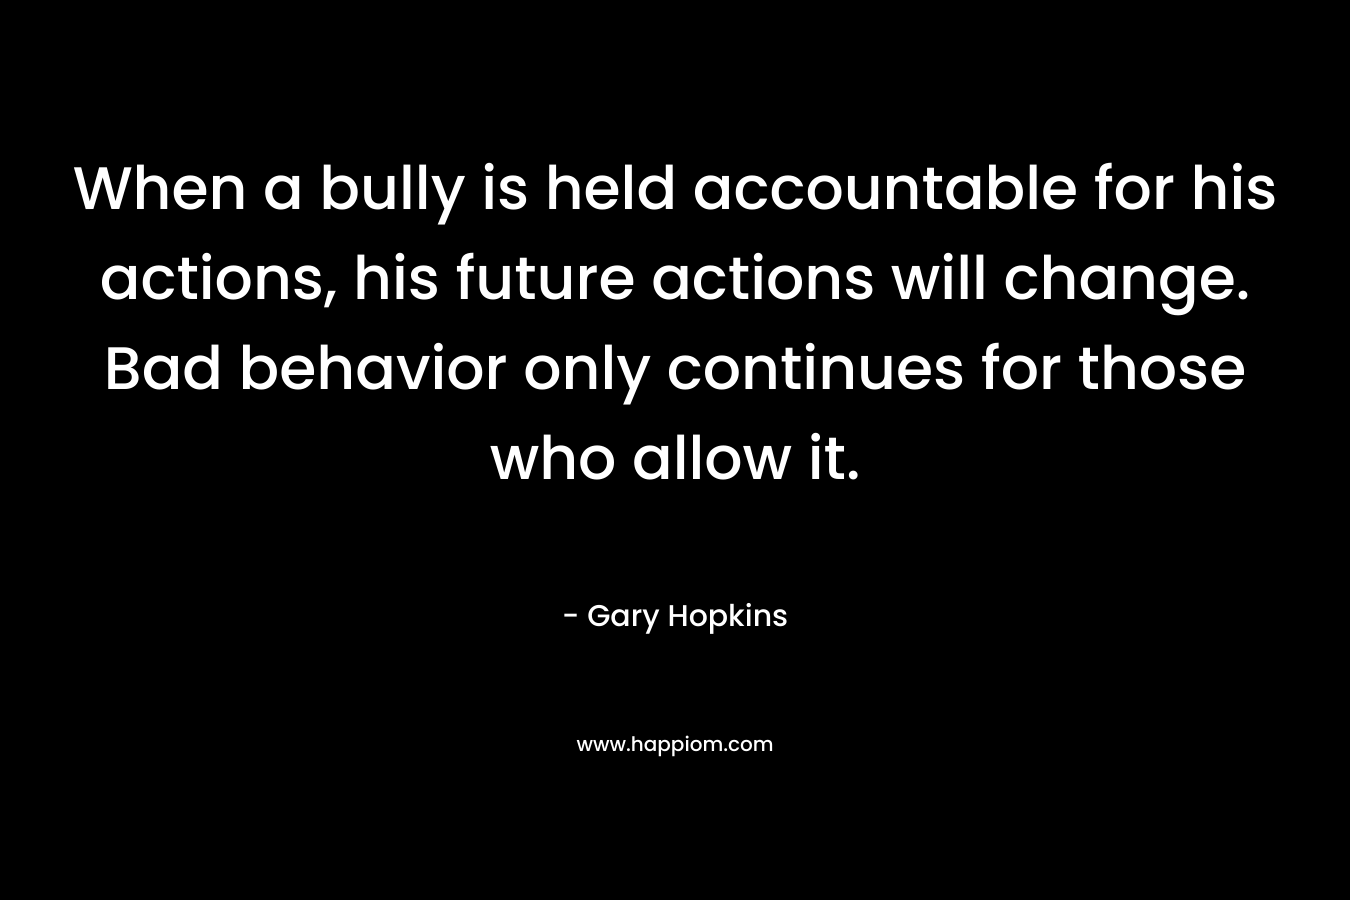 When a bully is held accountable for his actions, his future actions will change. Bad behavior only continues for those who allow it.